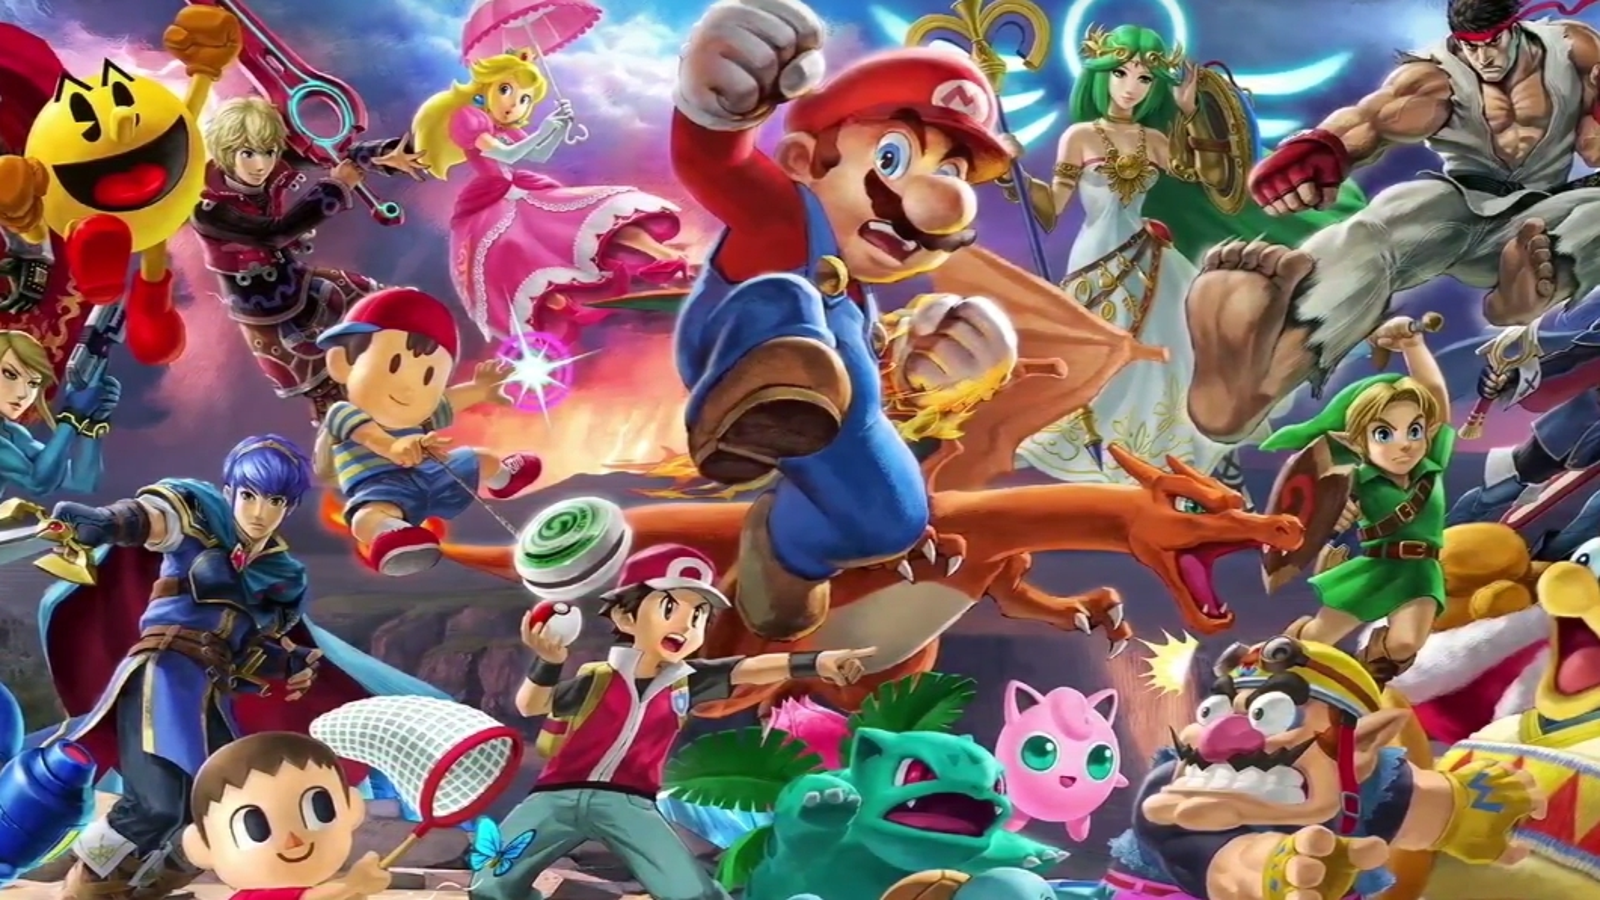 I want to get into a fighting game similar to Super Smash Bros